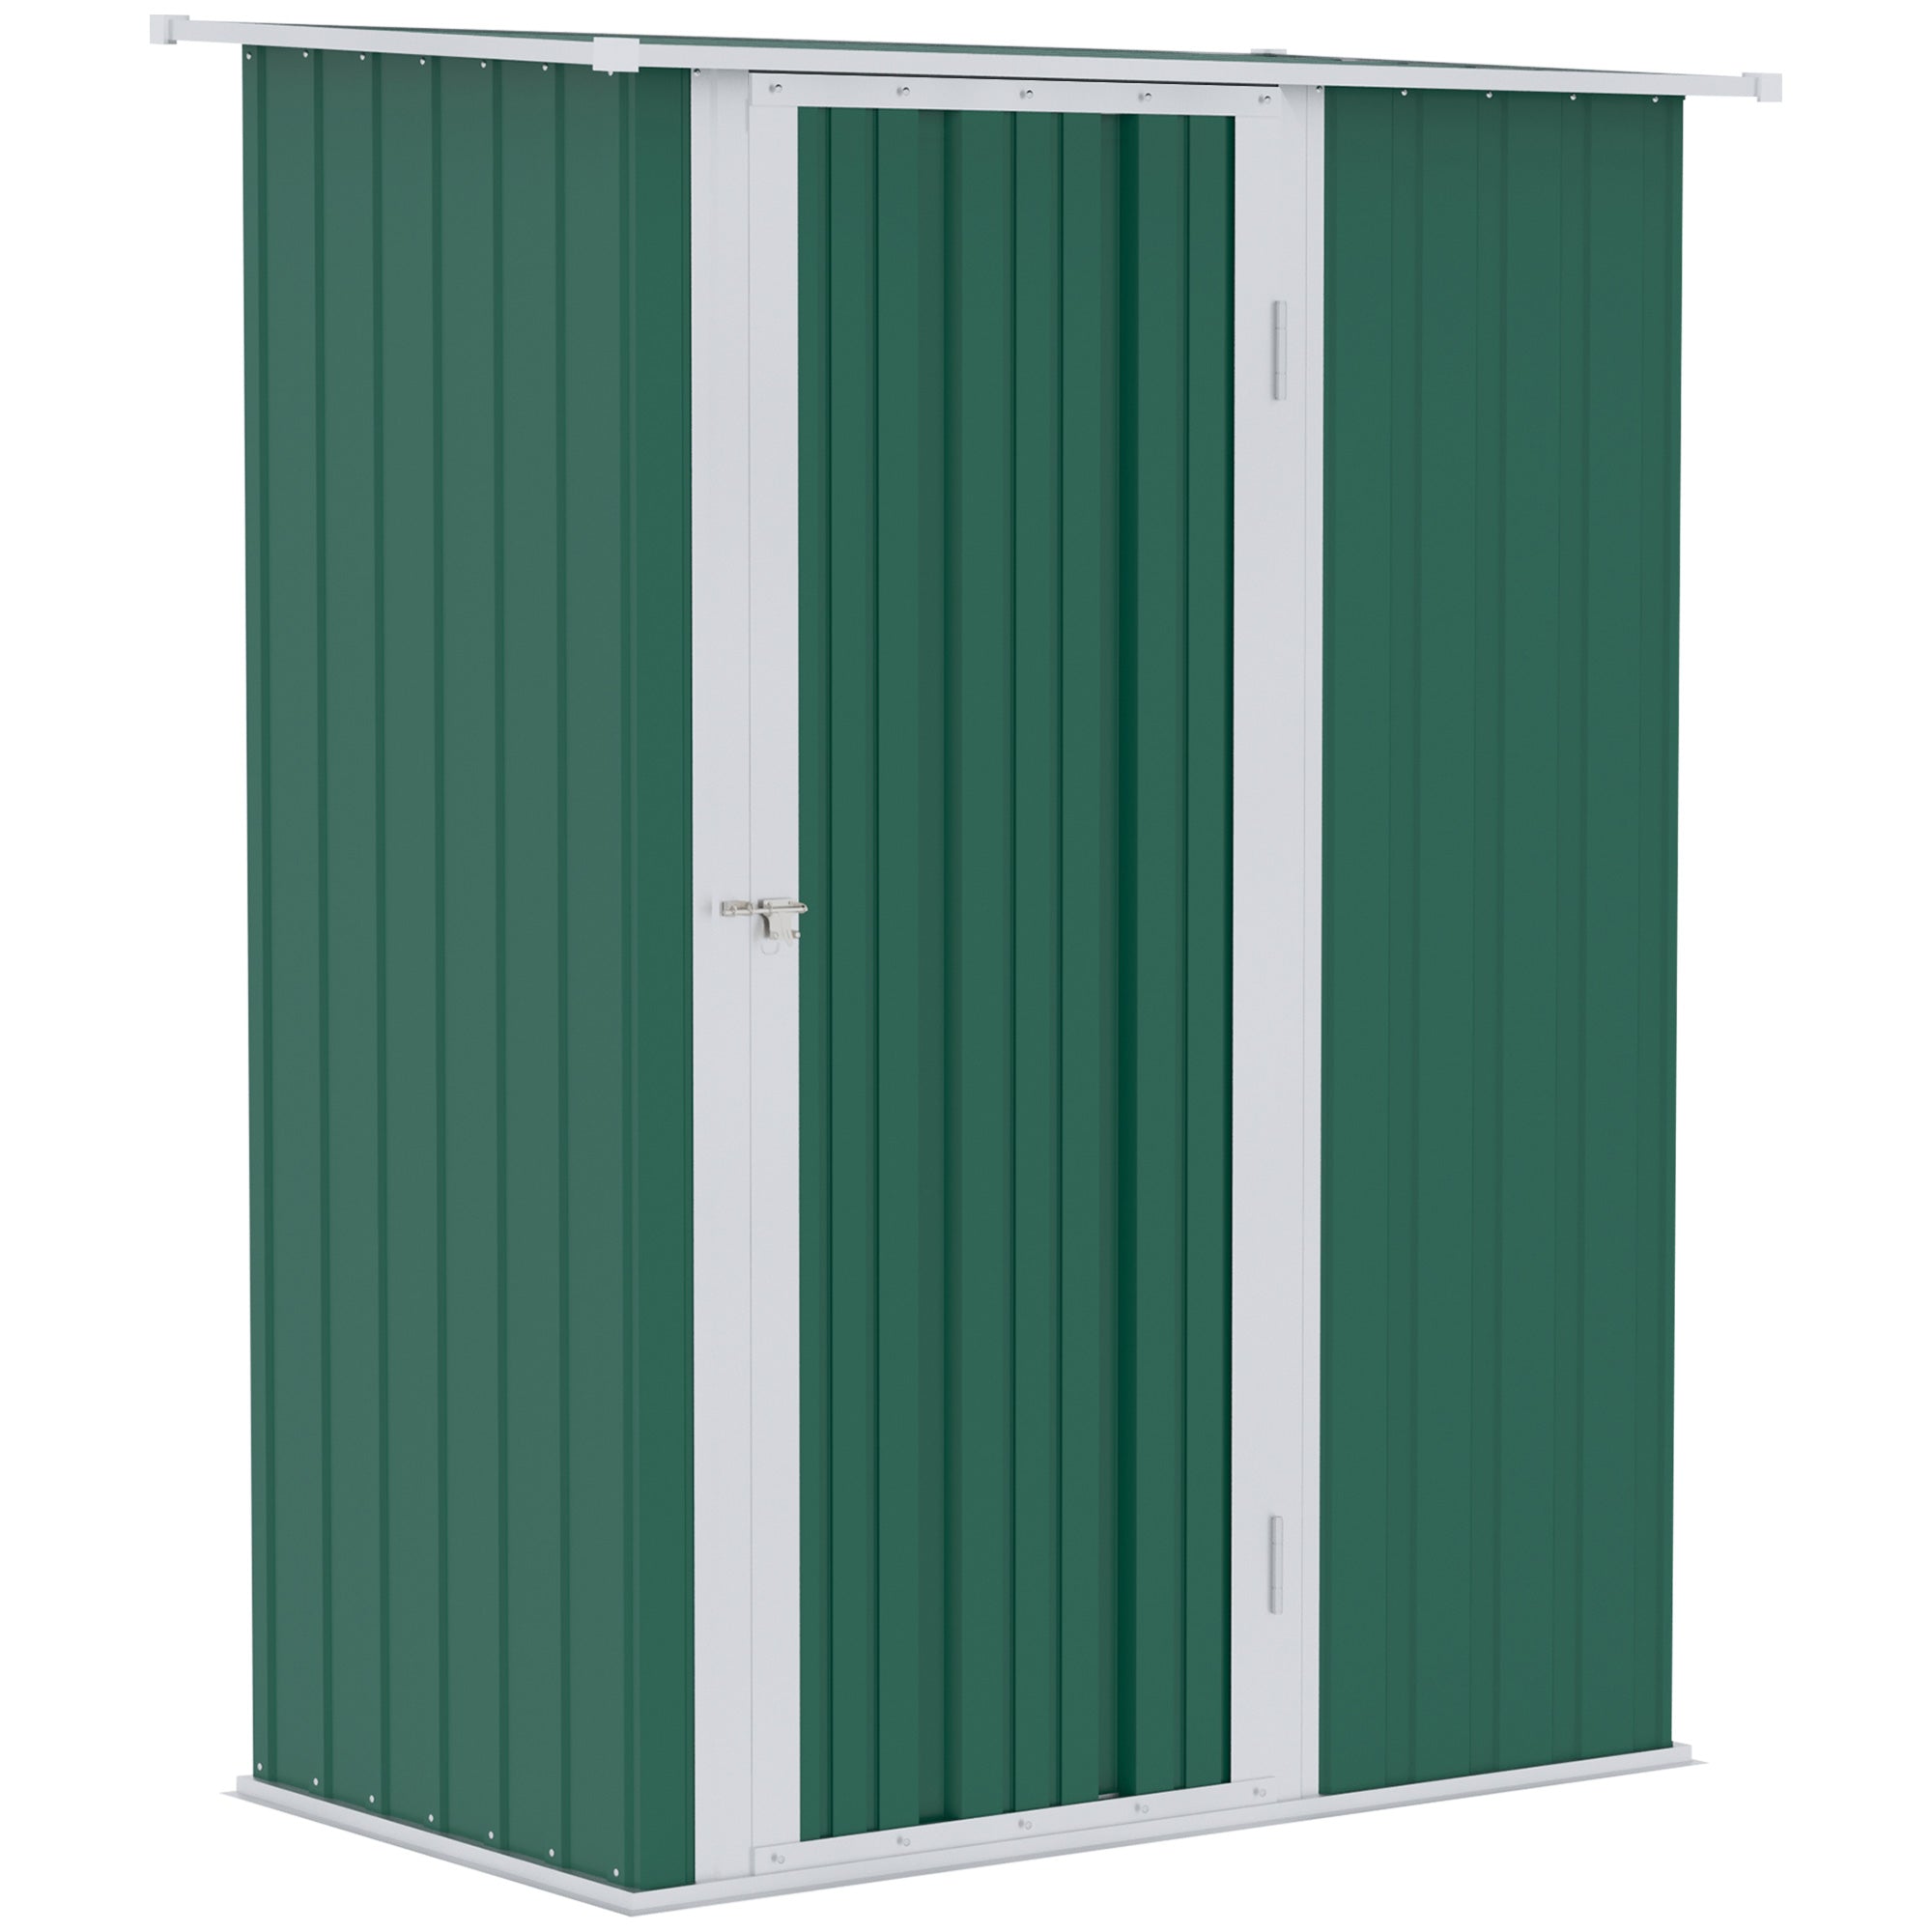 Outsunny Outdoor Storage Shed Steel Garden Shed with Lockable Door Green  | TJ Hughes